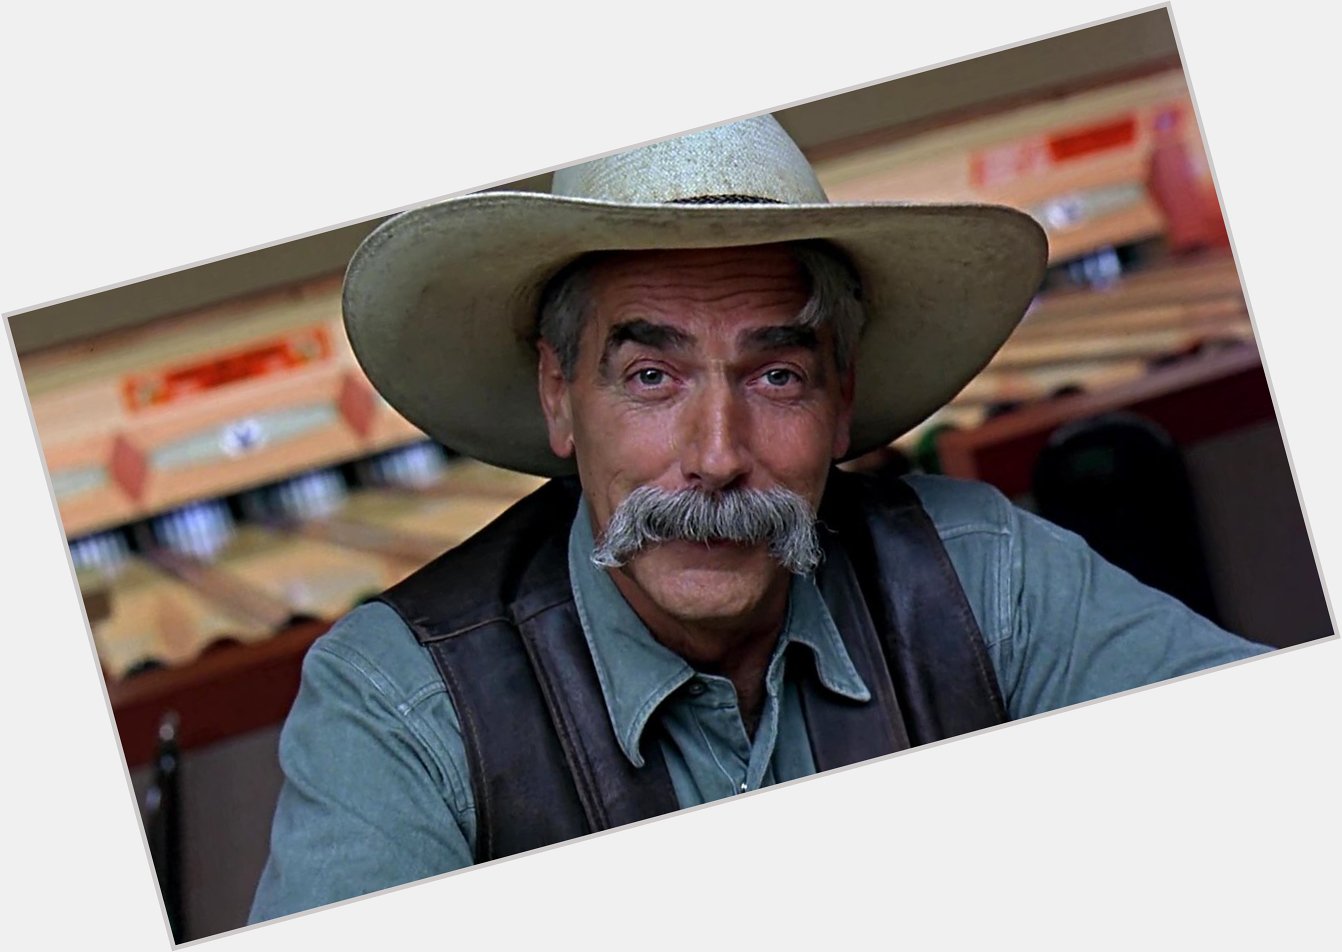 Happy birthday to the legend that is Sam Elliott! 73 years young! 